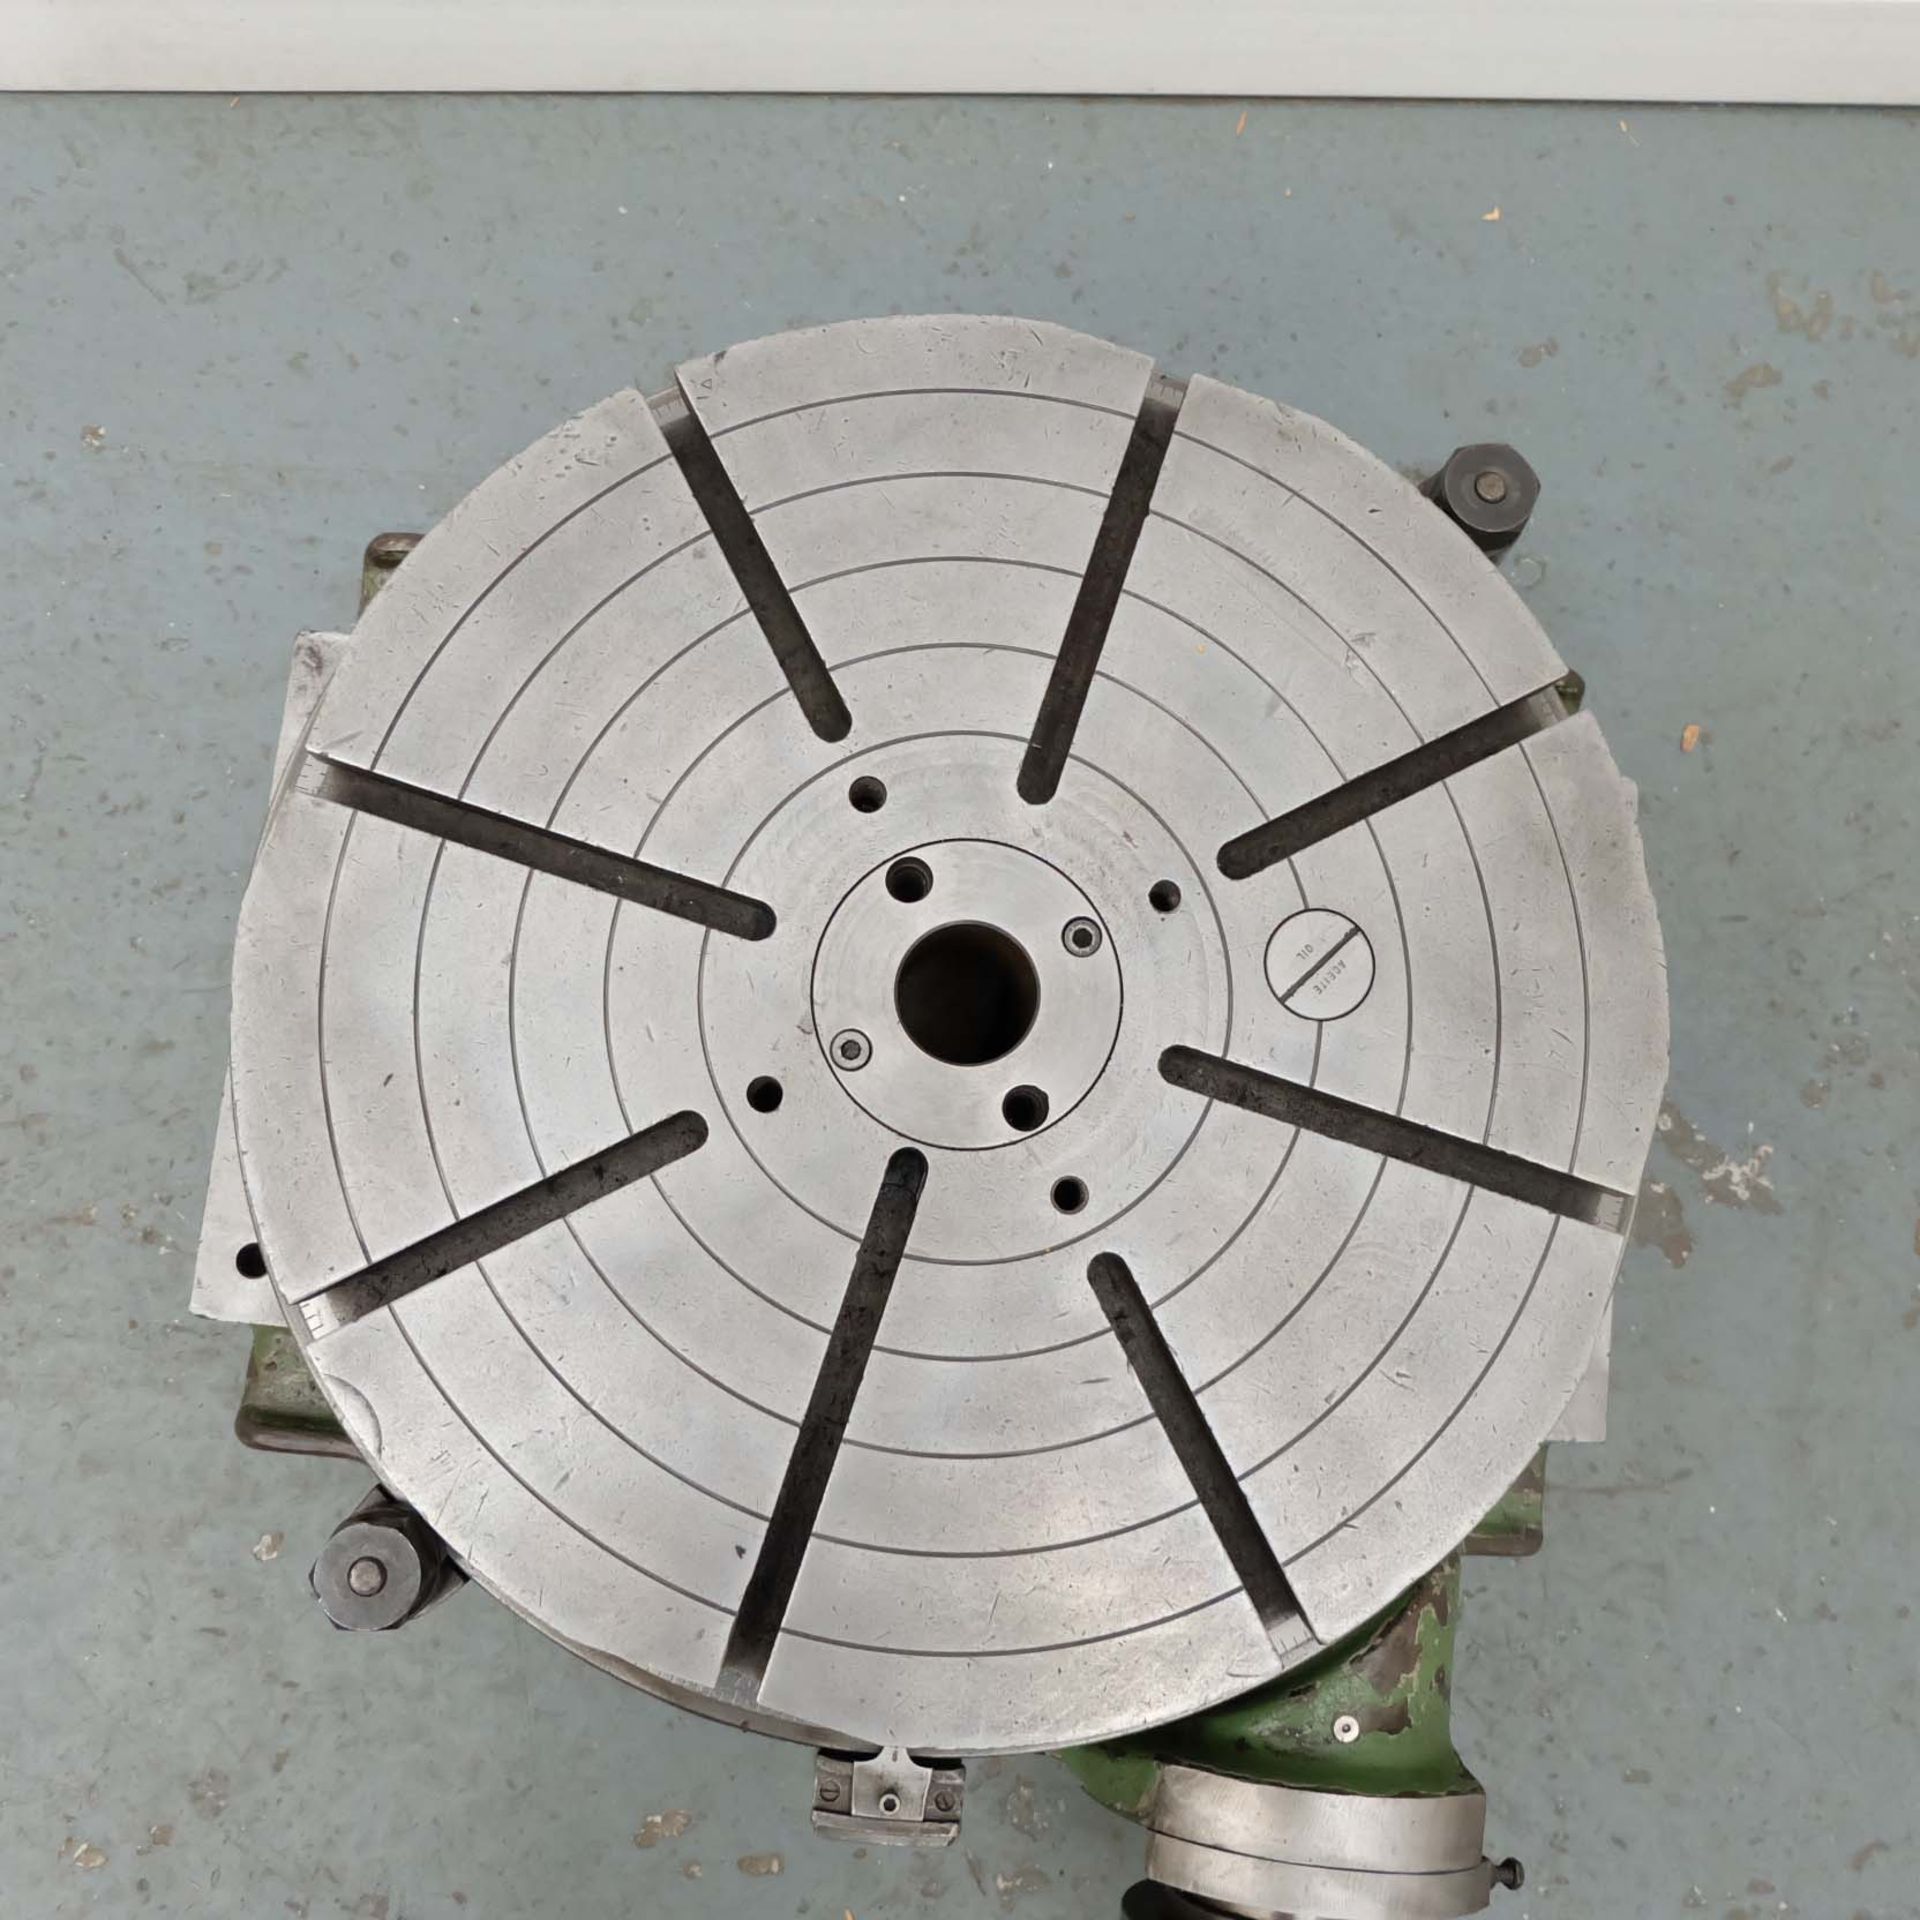 MECA 19 1/2" Rotary Table. With Extended Handwheel 14". Tee Slotted. - Image 4 of 7